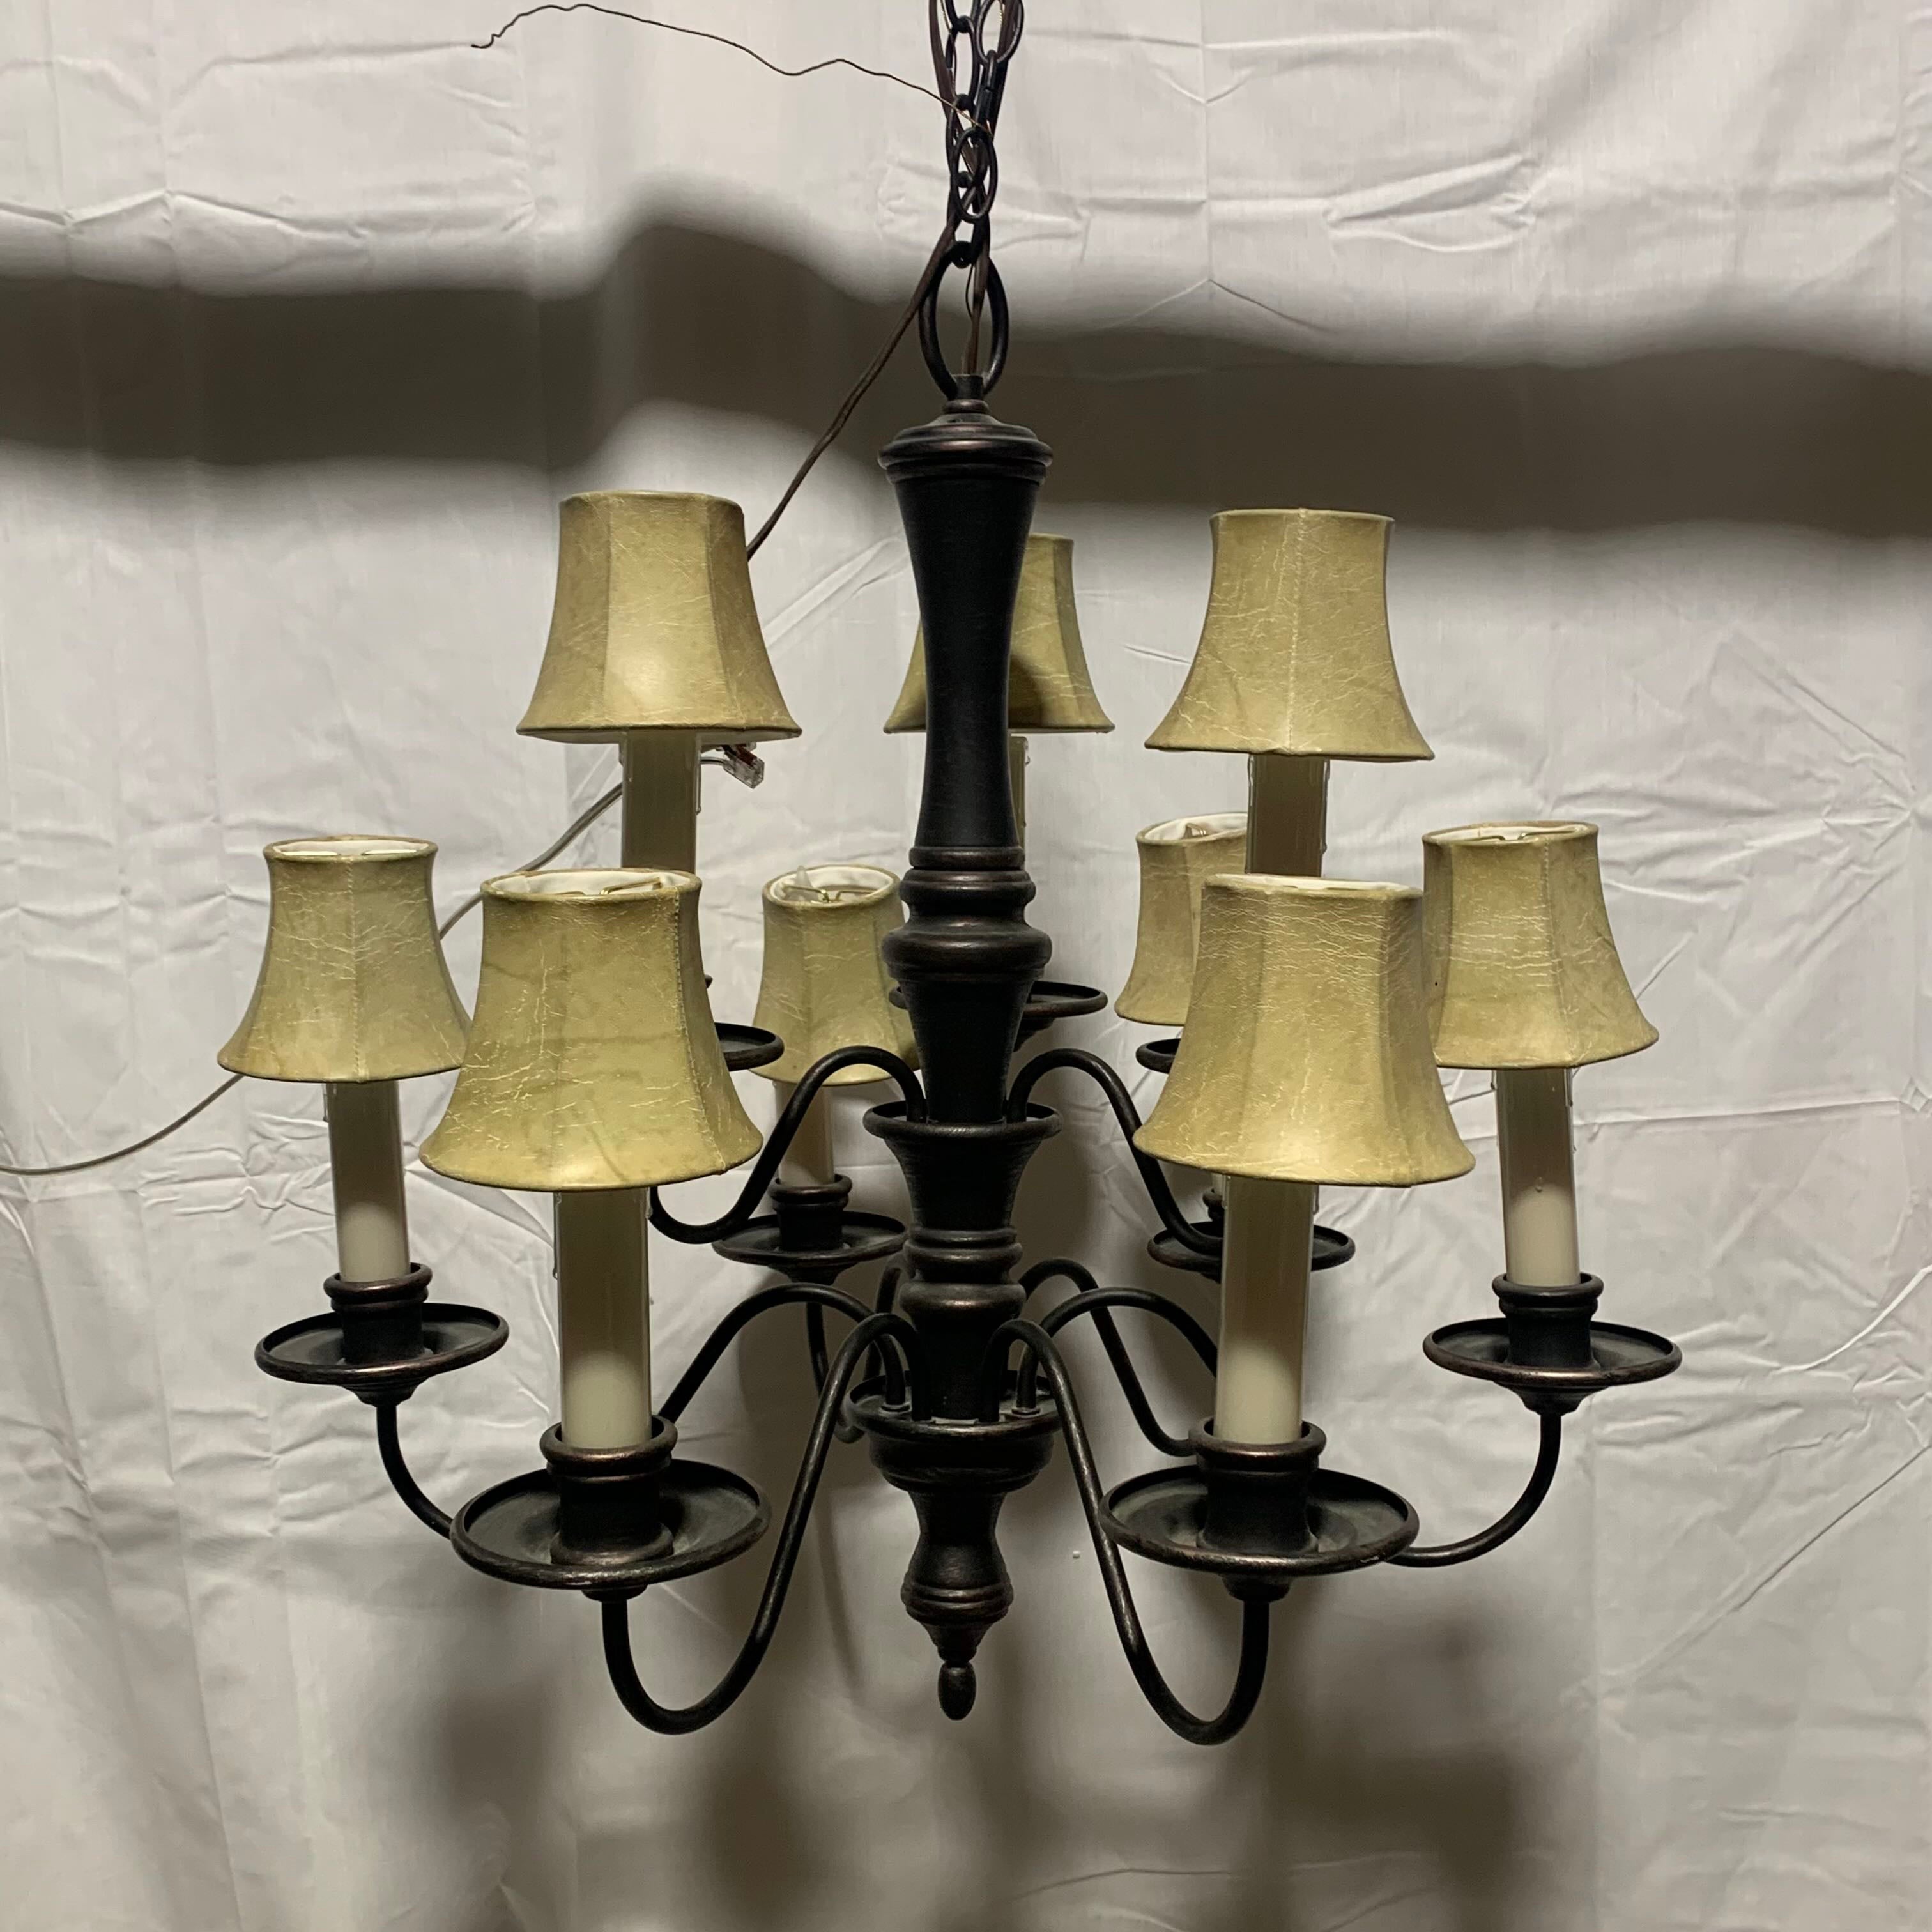 26" Diameter x 27" Bronze Colored Metal 9 Light with Shades Chandelier